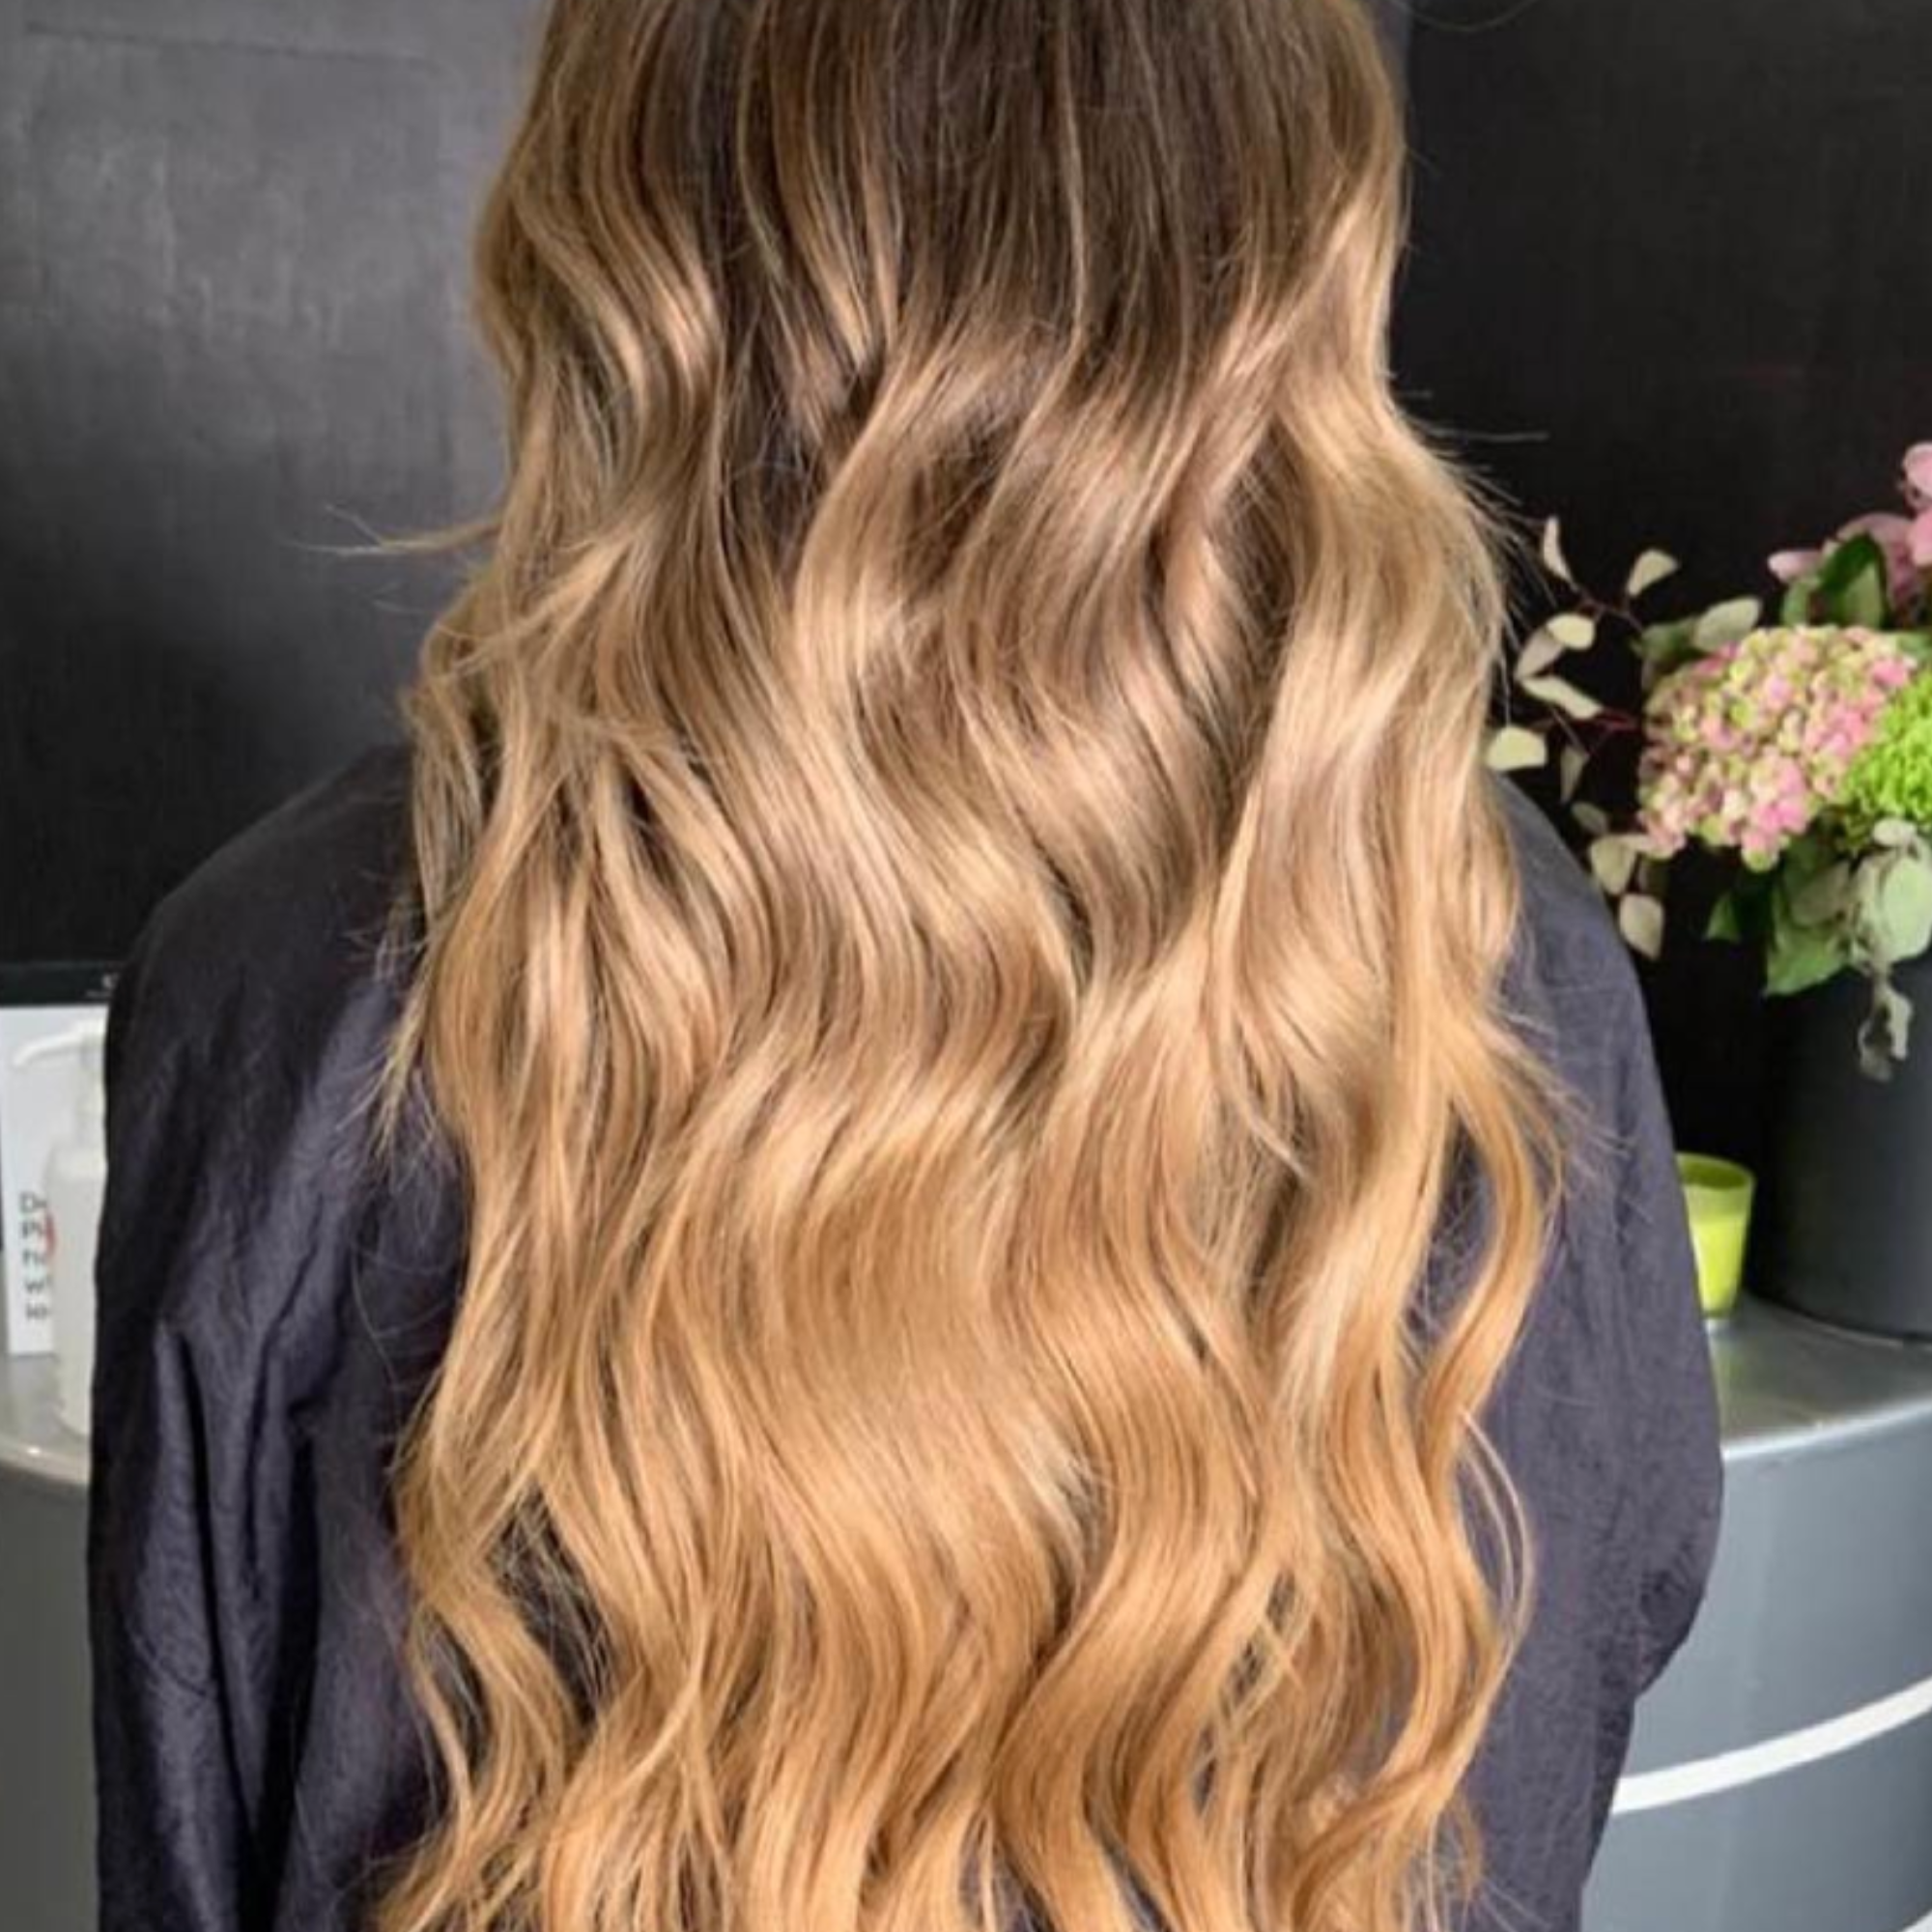 18" Stick Tip Extensions Rooted Boho